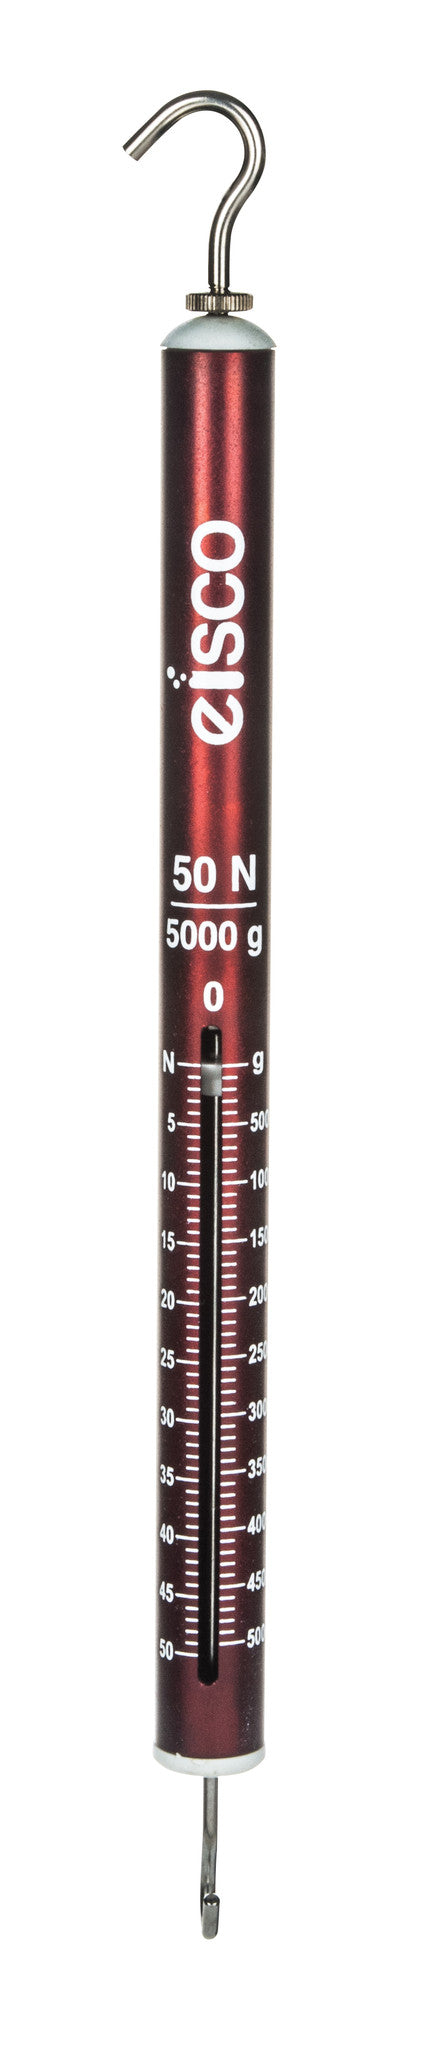 Half Meter Stick, Hardwood 50cm with Vertical Reading Graduated in  Centimeters and Millimeters - Eisco Labs 